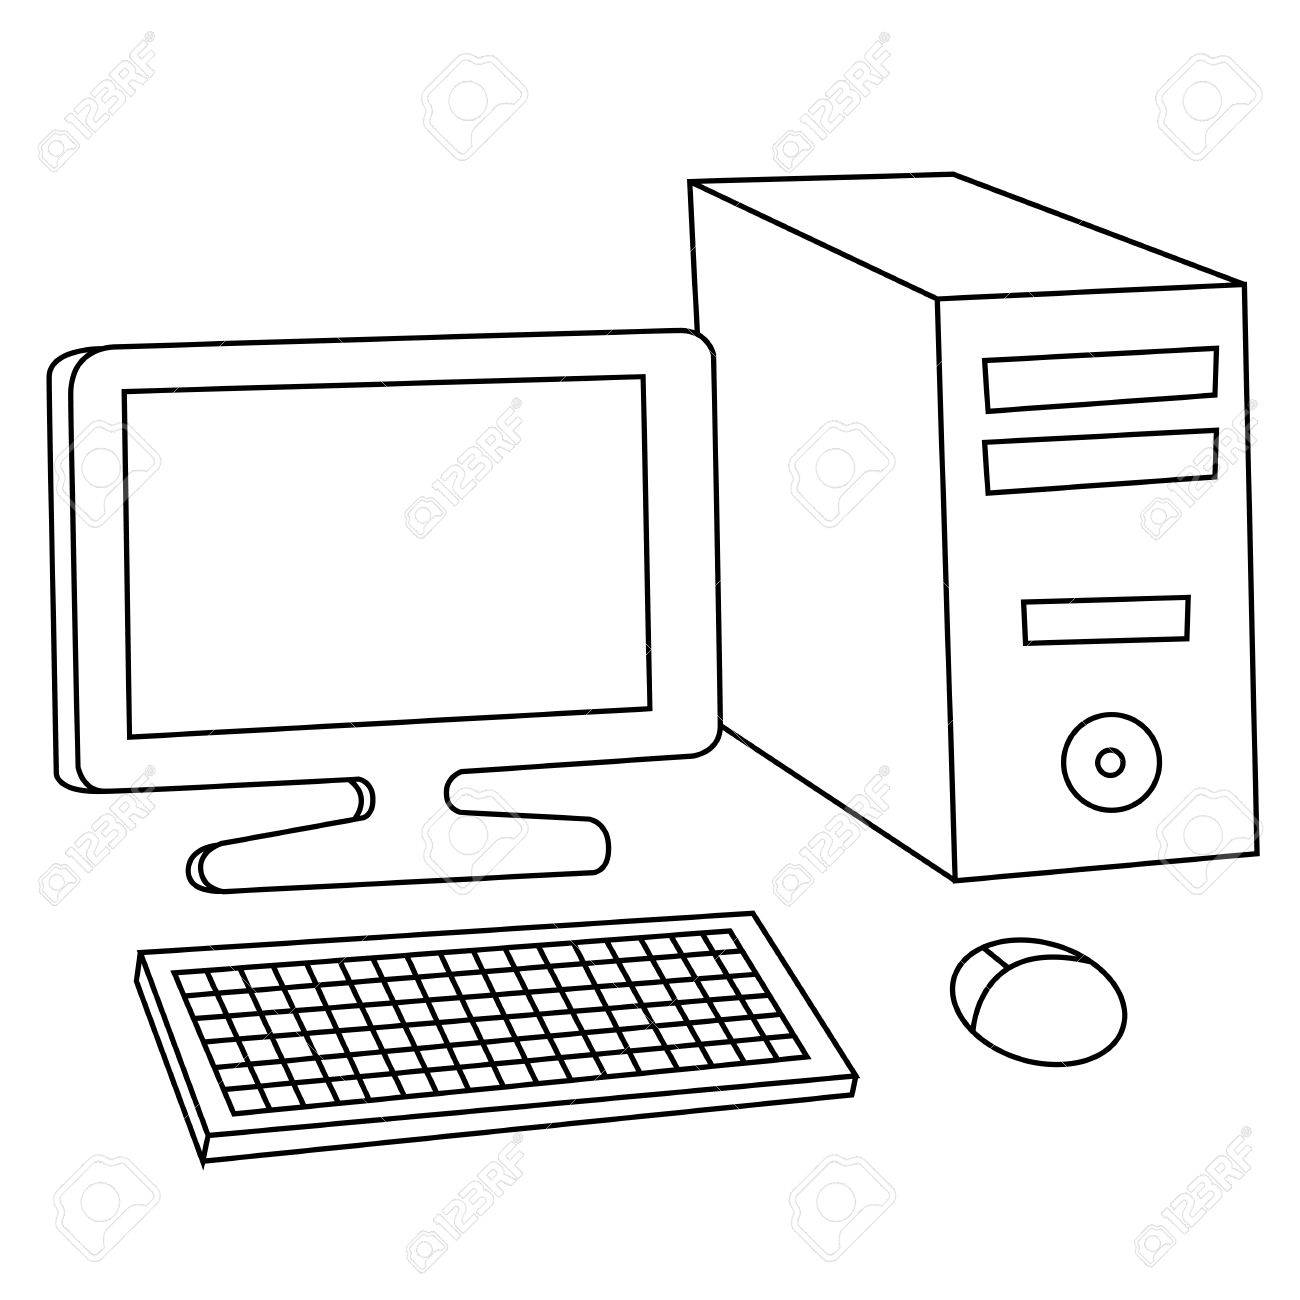 Free Pc Clipart outline, Download Free Clip Art on Owips